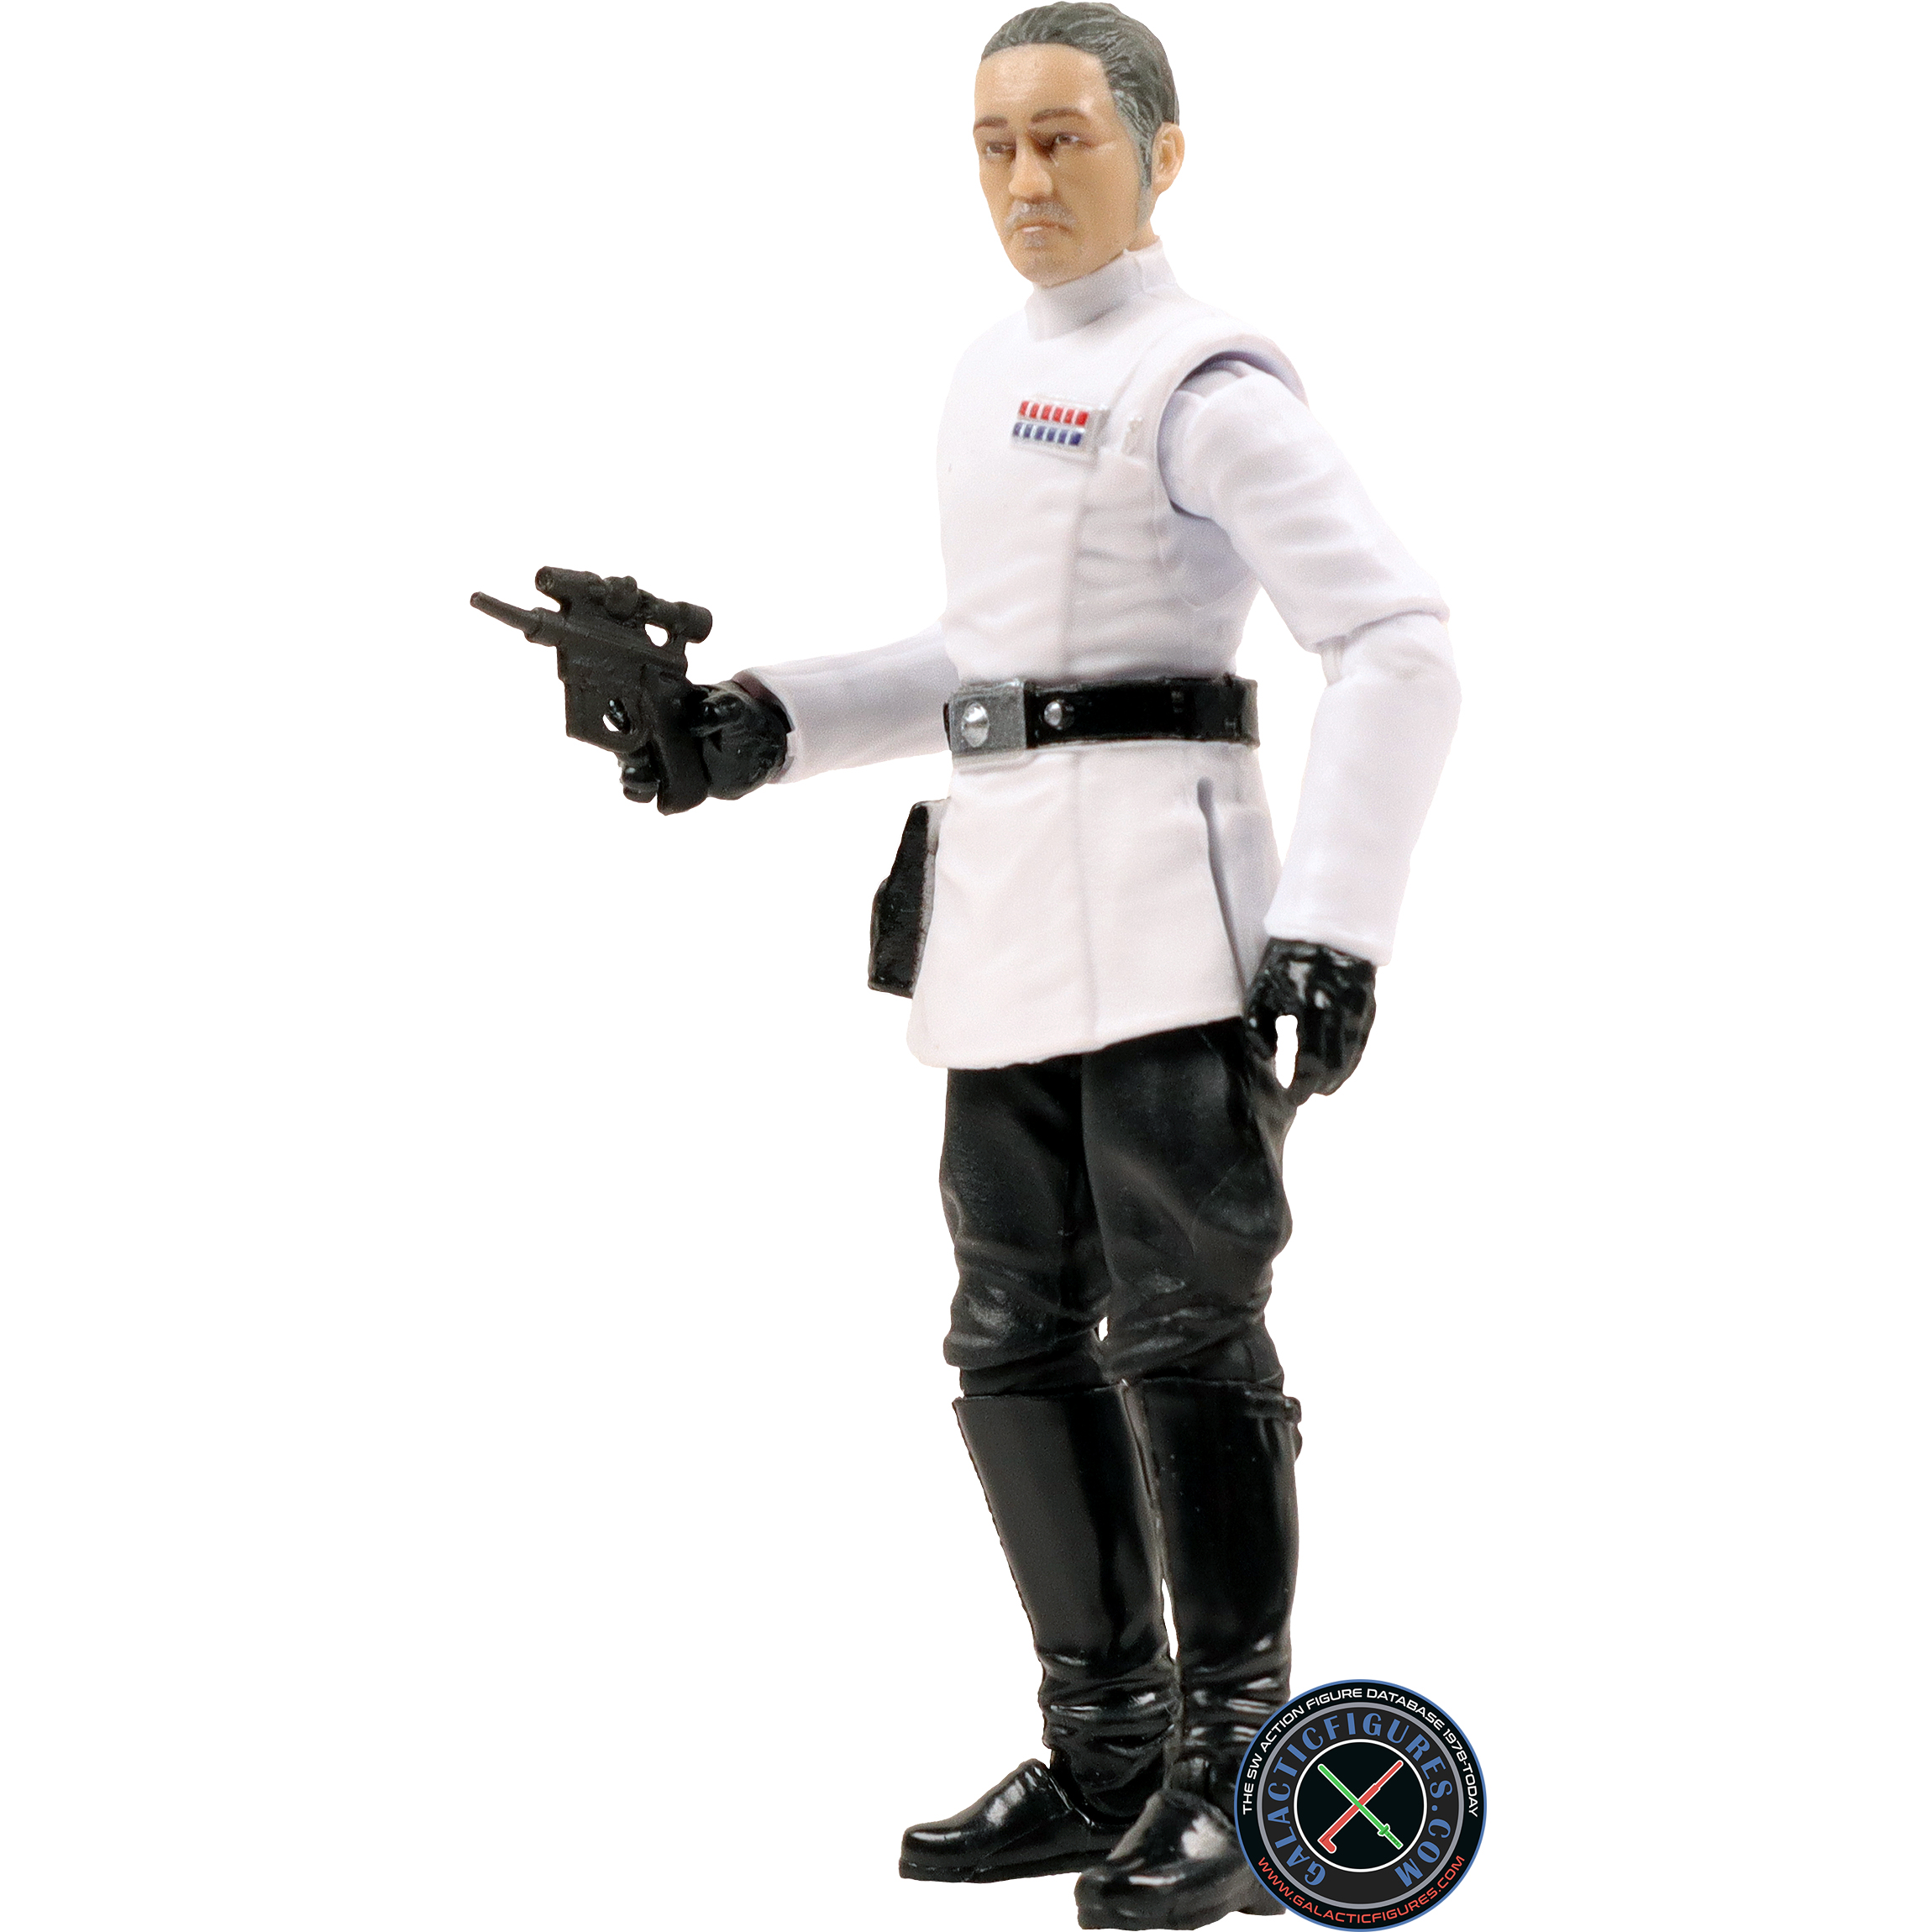 Imperial Officer Imperial Officer 4-pack